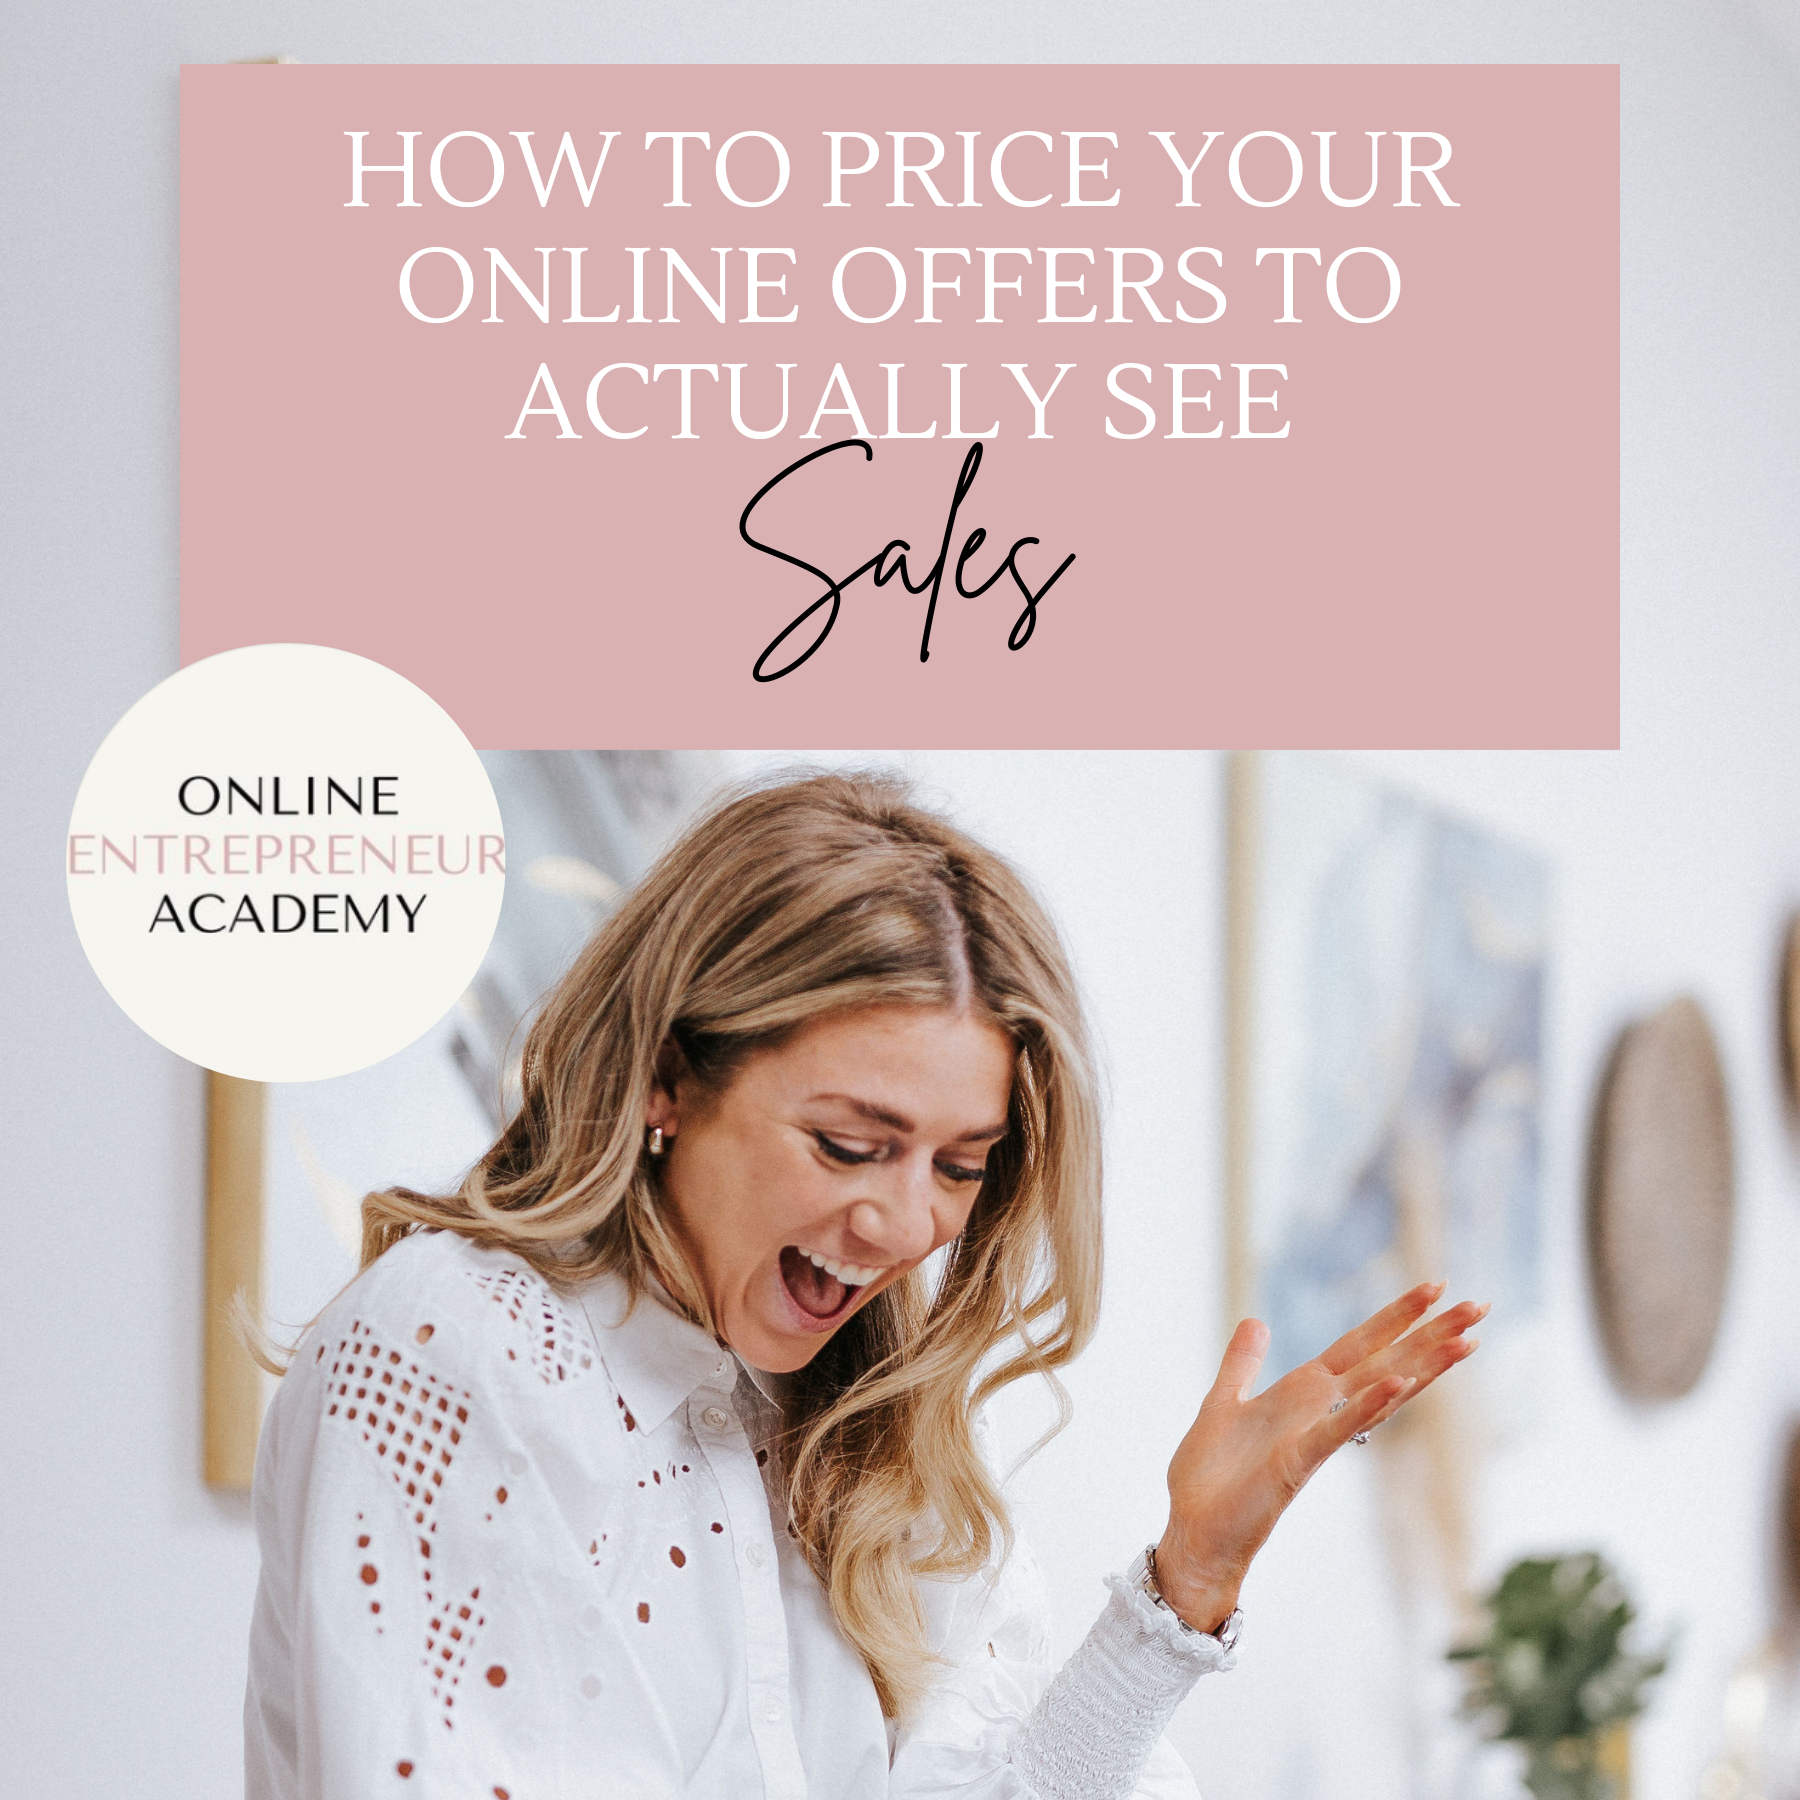 How To Price Your Online Offers To Actually See Sales